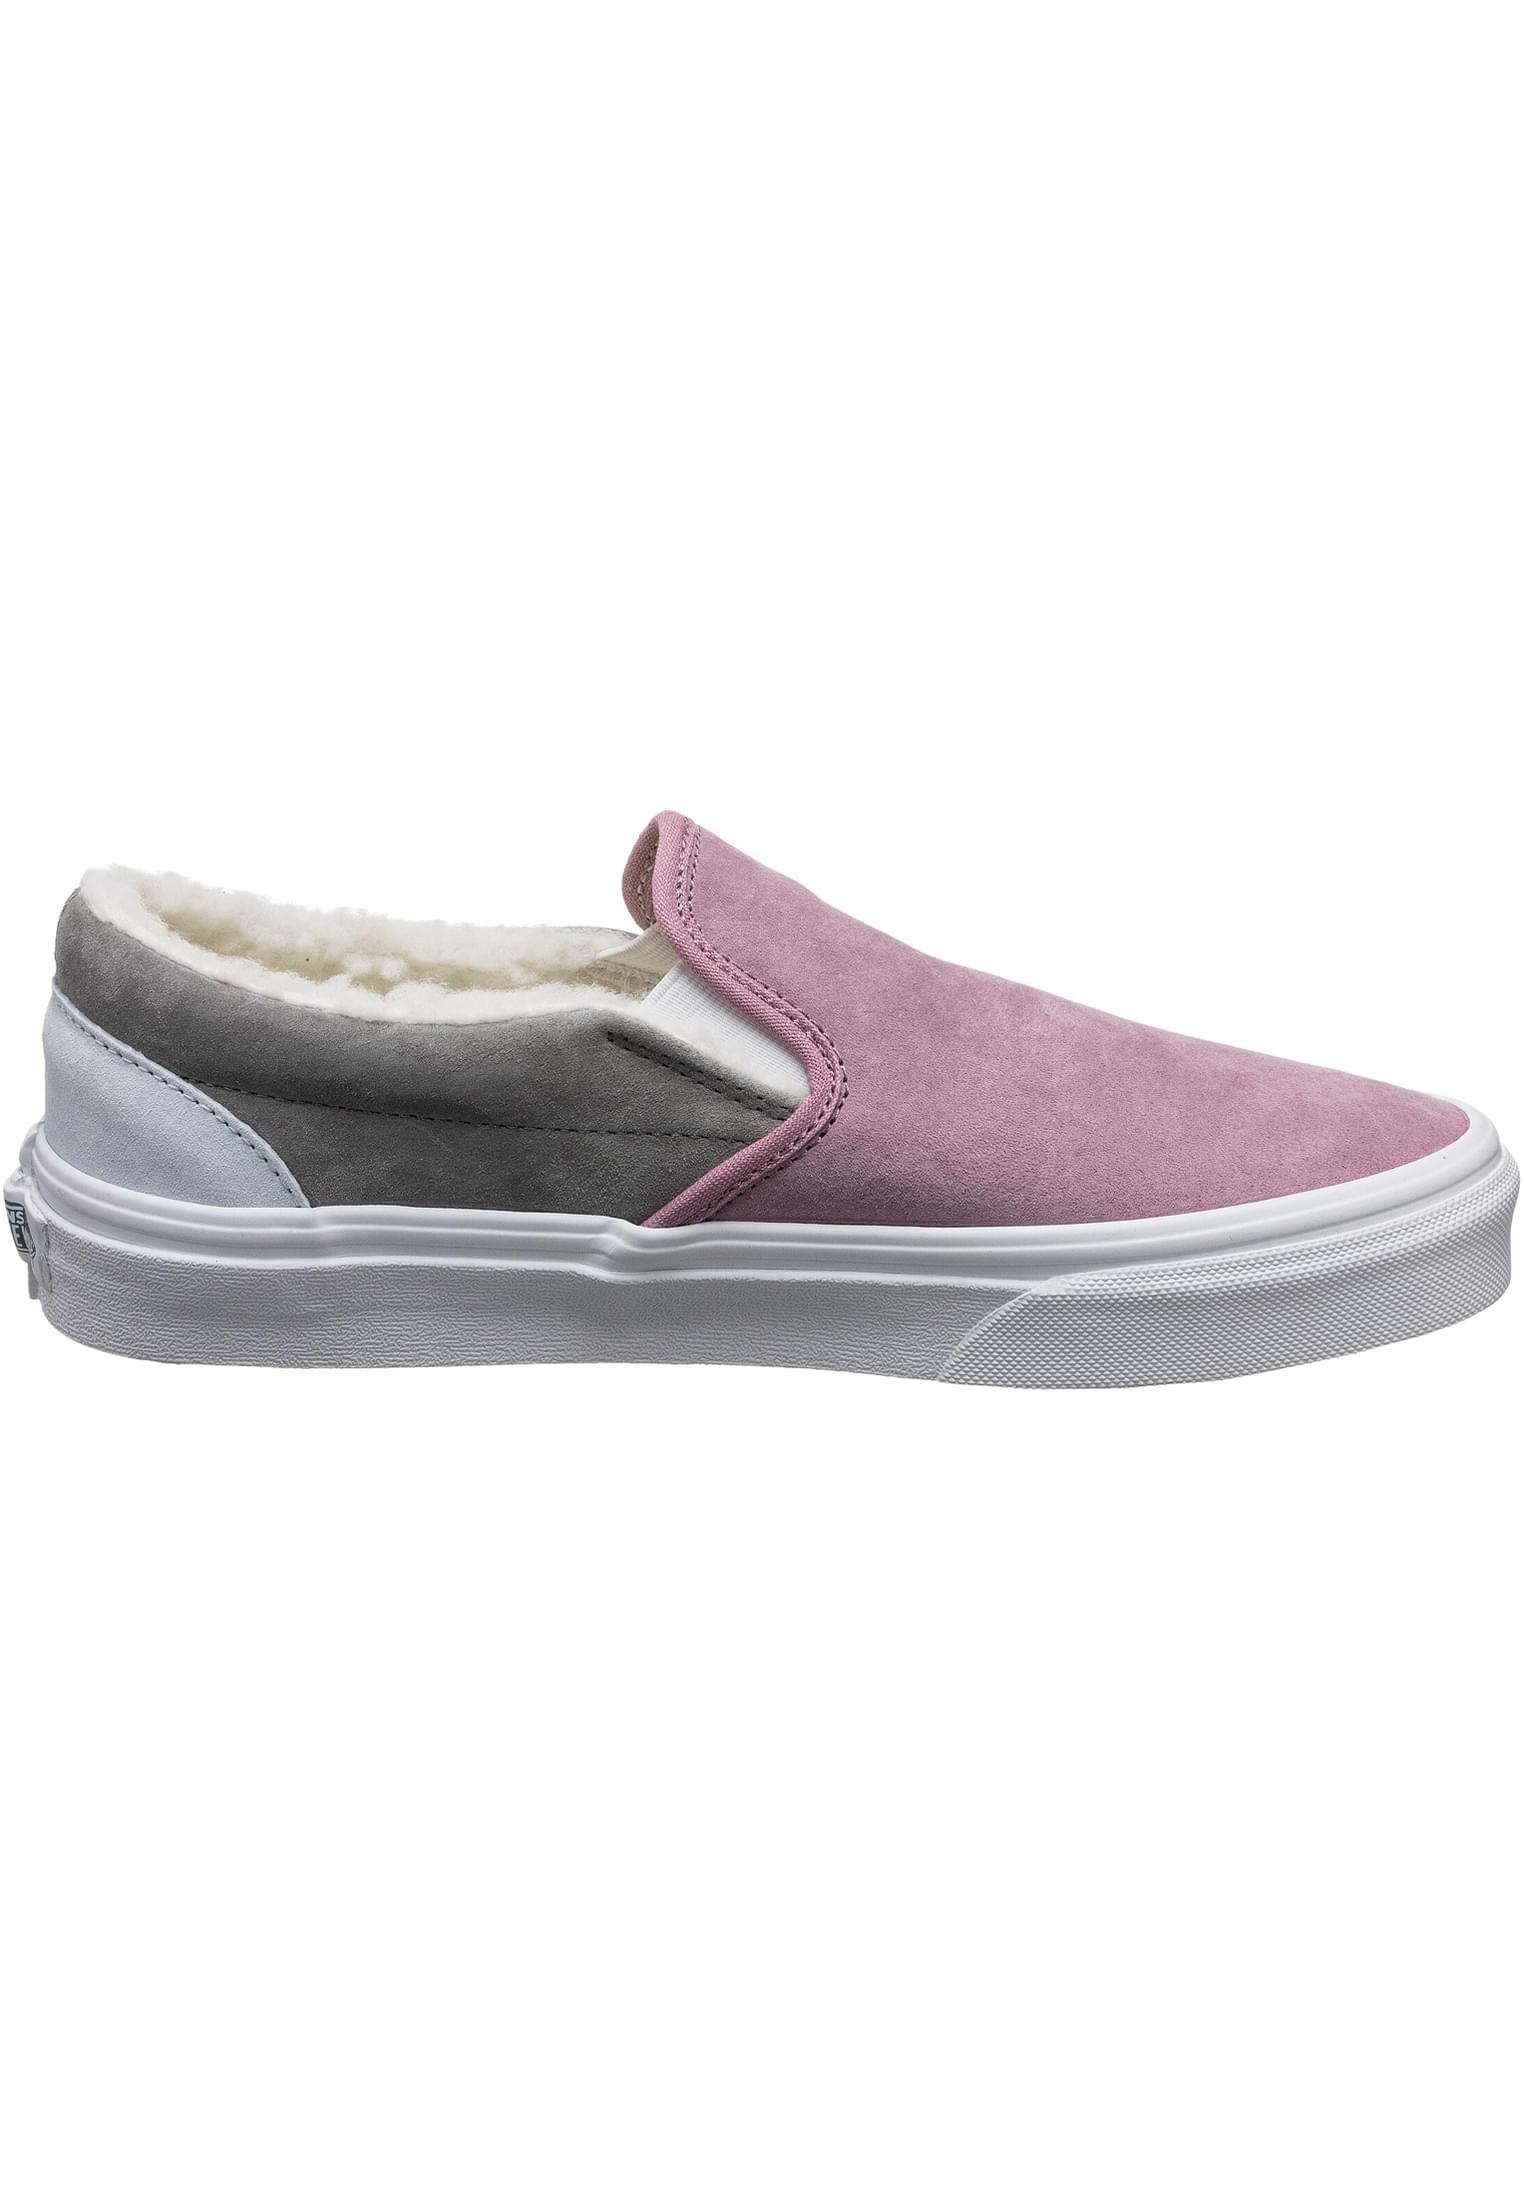 Vans Trainingsschuh »Unisex Vans Ua Classic Slip-On Color Theory Checkerboard Schuh«, (1 tlg.)